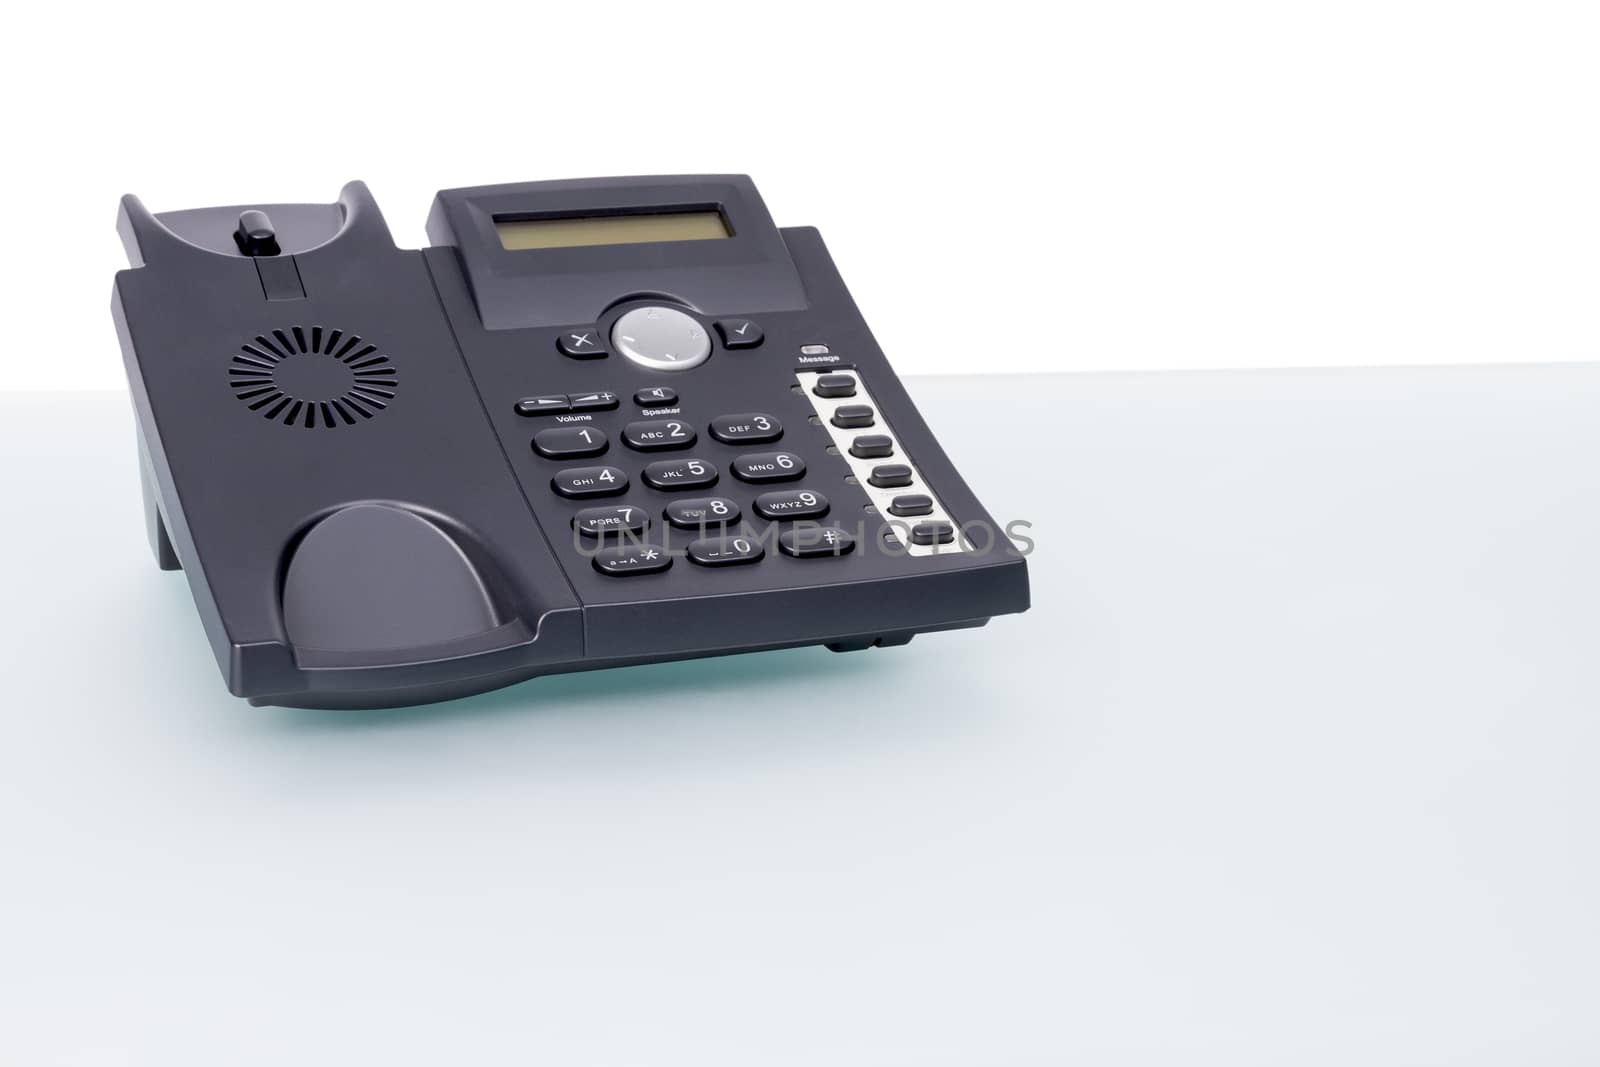 voip phone on glass desk by gewoldi